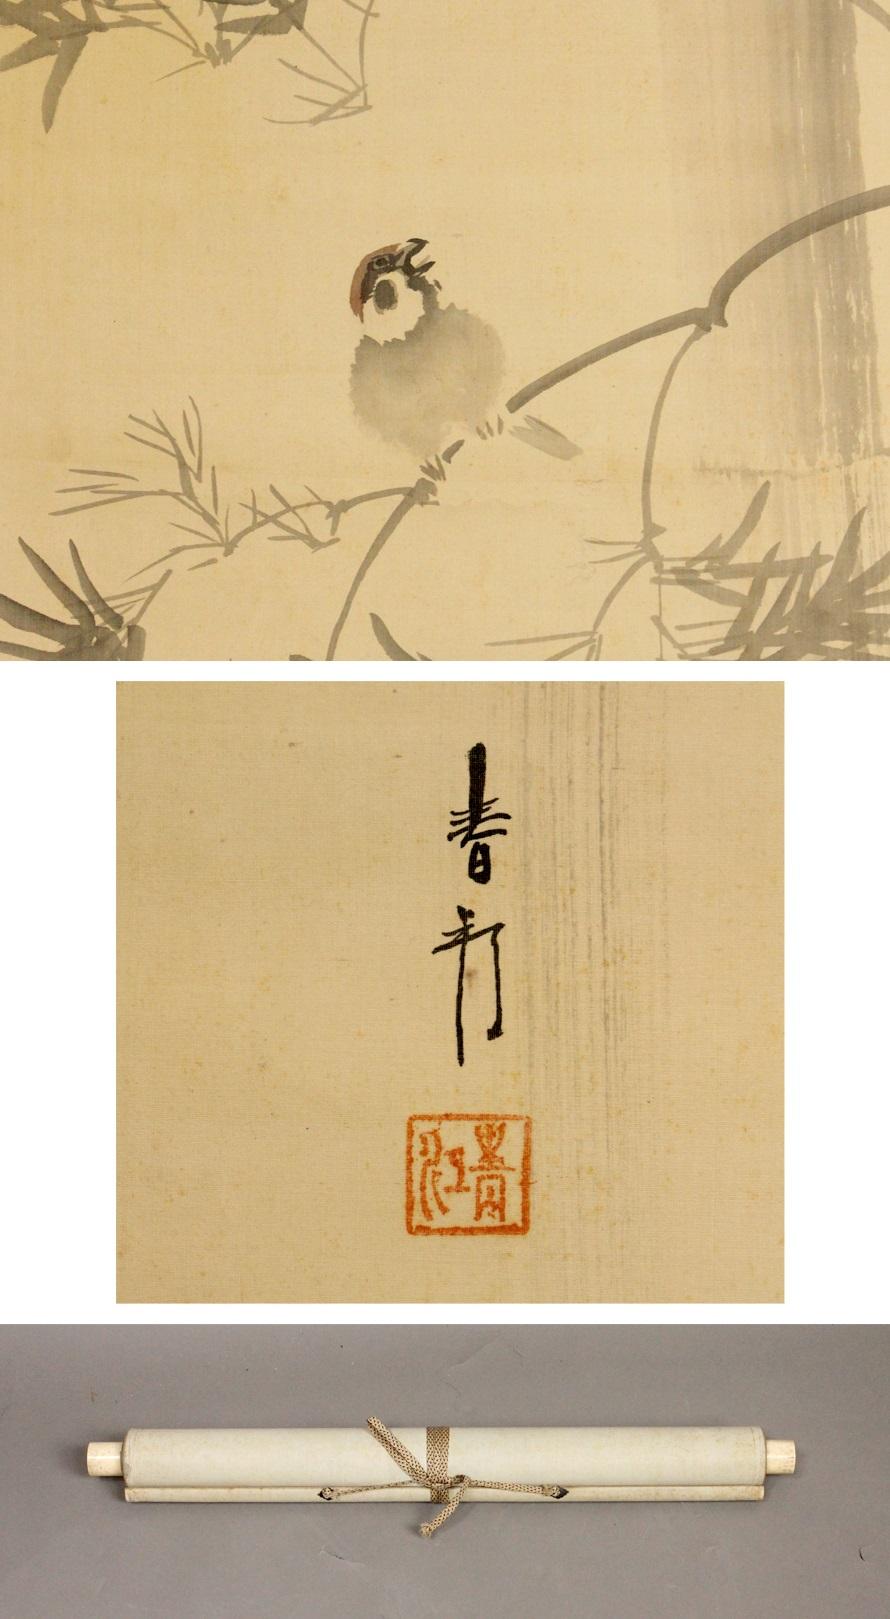 As you can see, this work depicts a sparrow in a bamboo grove with sunlight shining through it.

¦ Silk book / handwriting.
¦
 There are some discolorations in the state era.

¦ Shaft dimensions / approx. 183.0 cm x approx. 49.0 cm.
¦ Paper